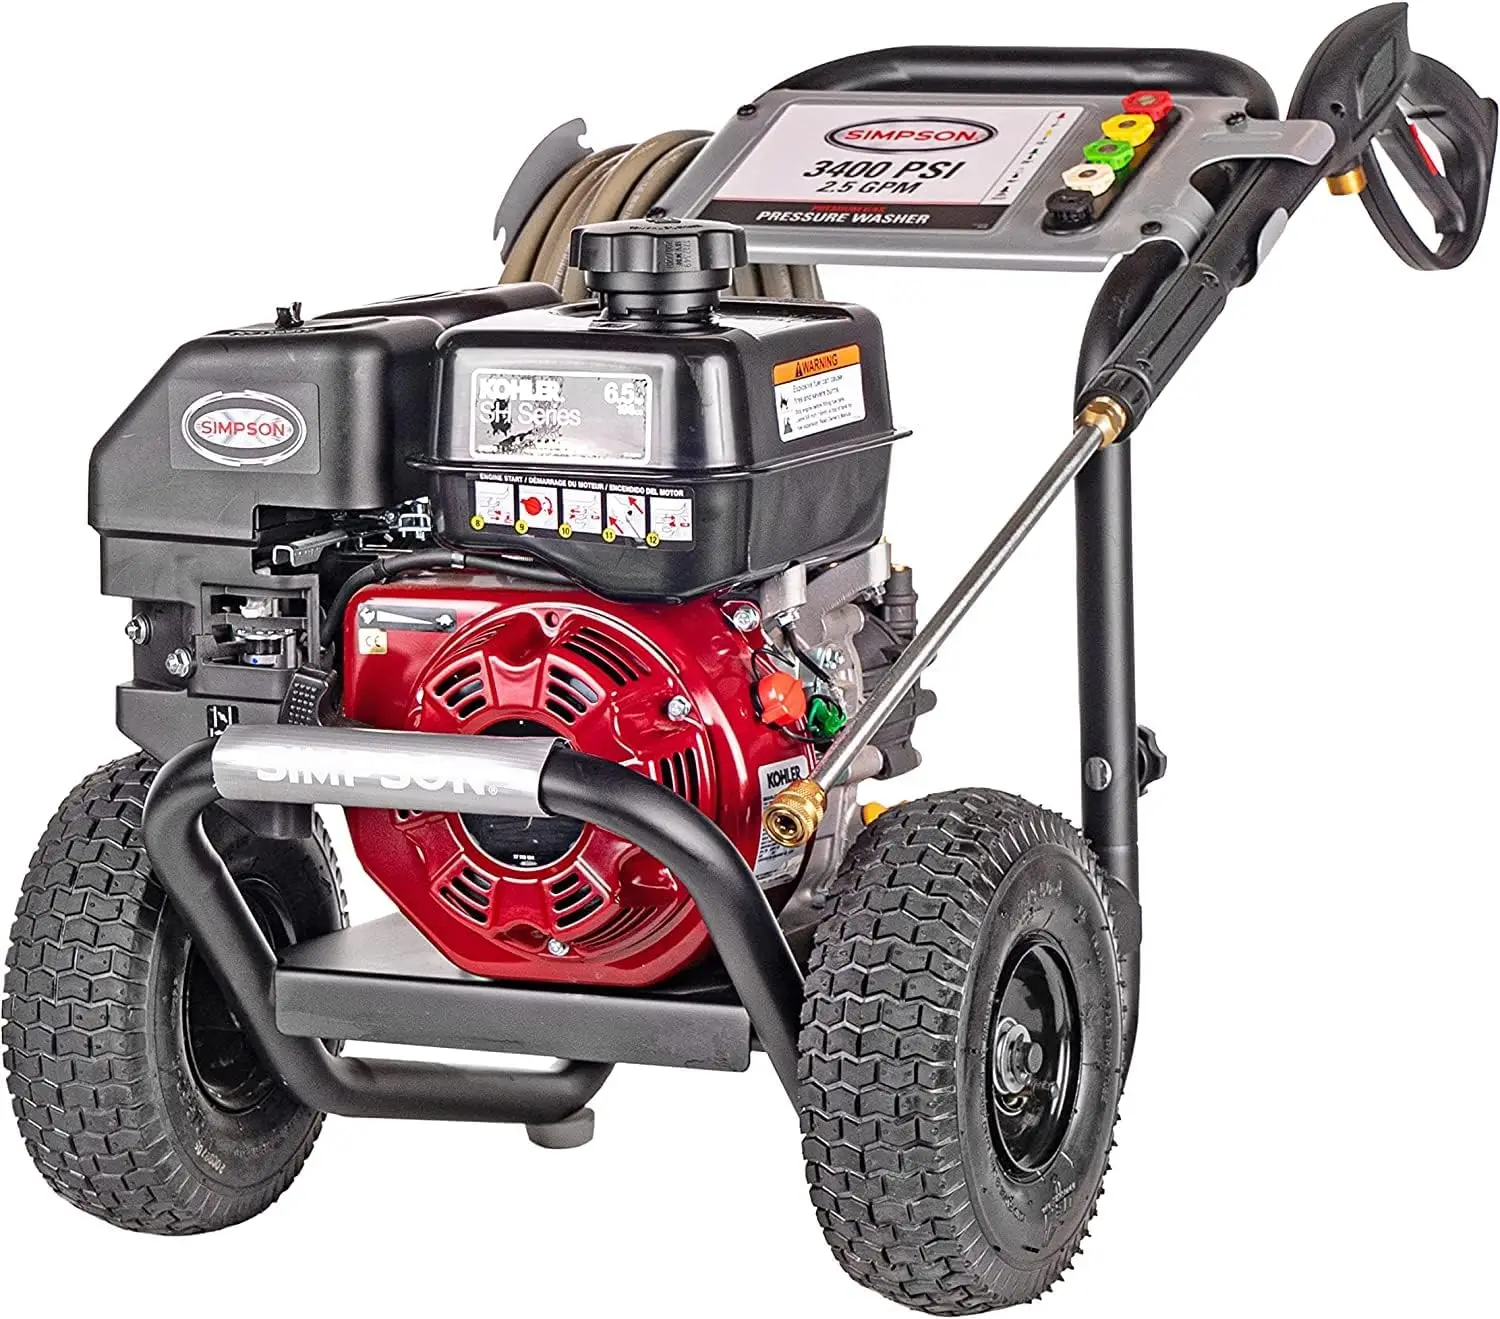 

3400 PSI Gas Pressure Washer, 2.5 GPM, SH270, Includes Spray Gun and Extension Wand, 5 QC Nozzle Tips, 5/16-in. x 25-ft